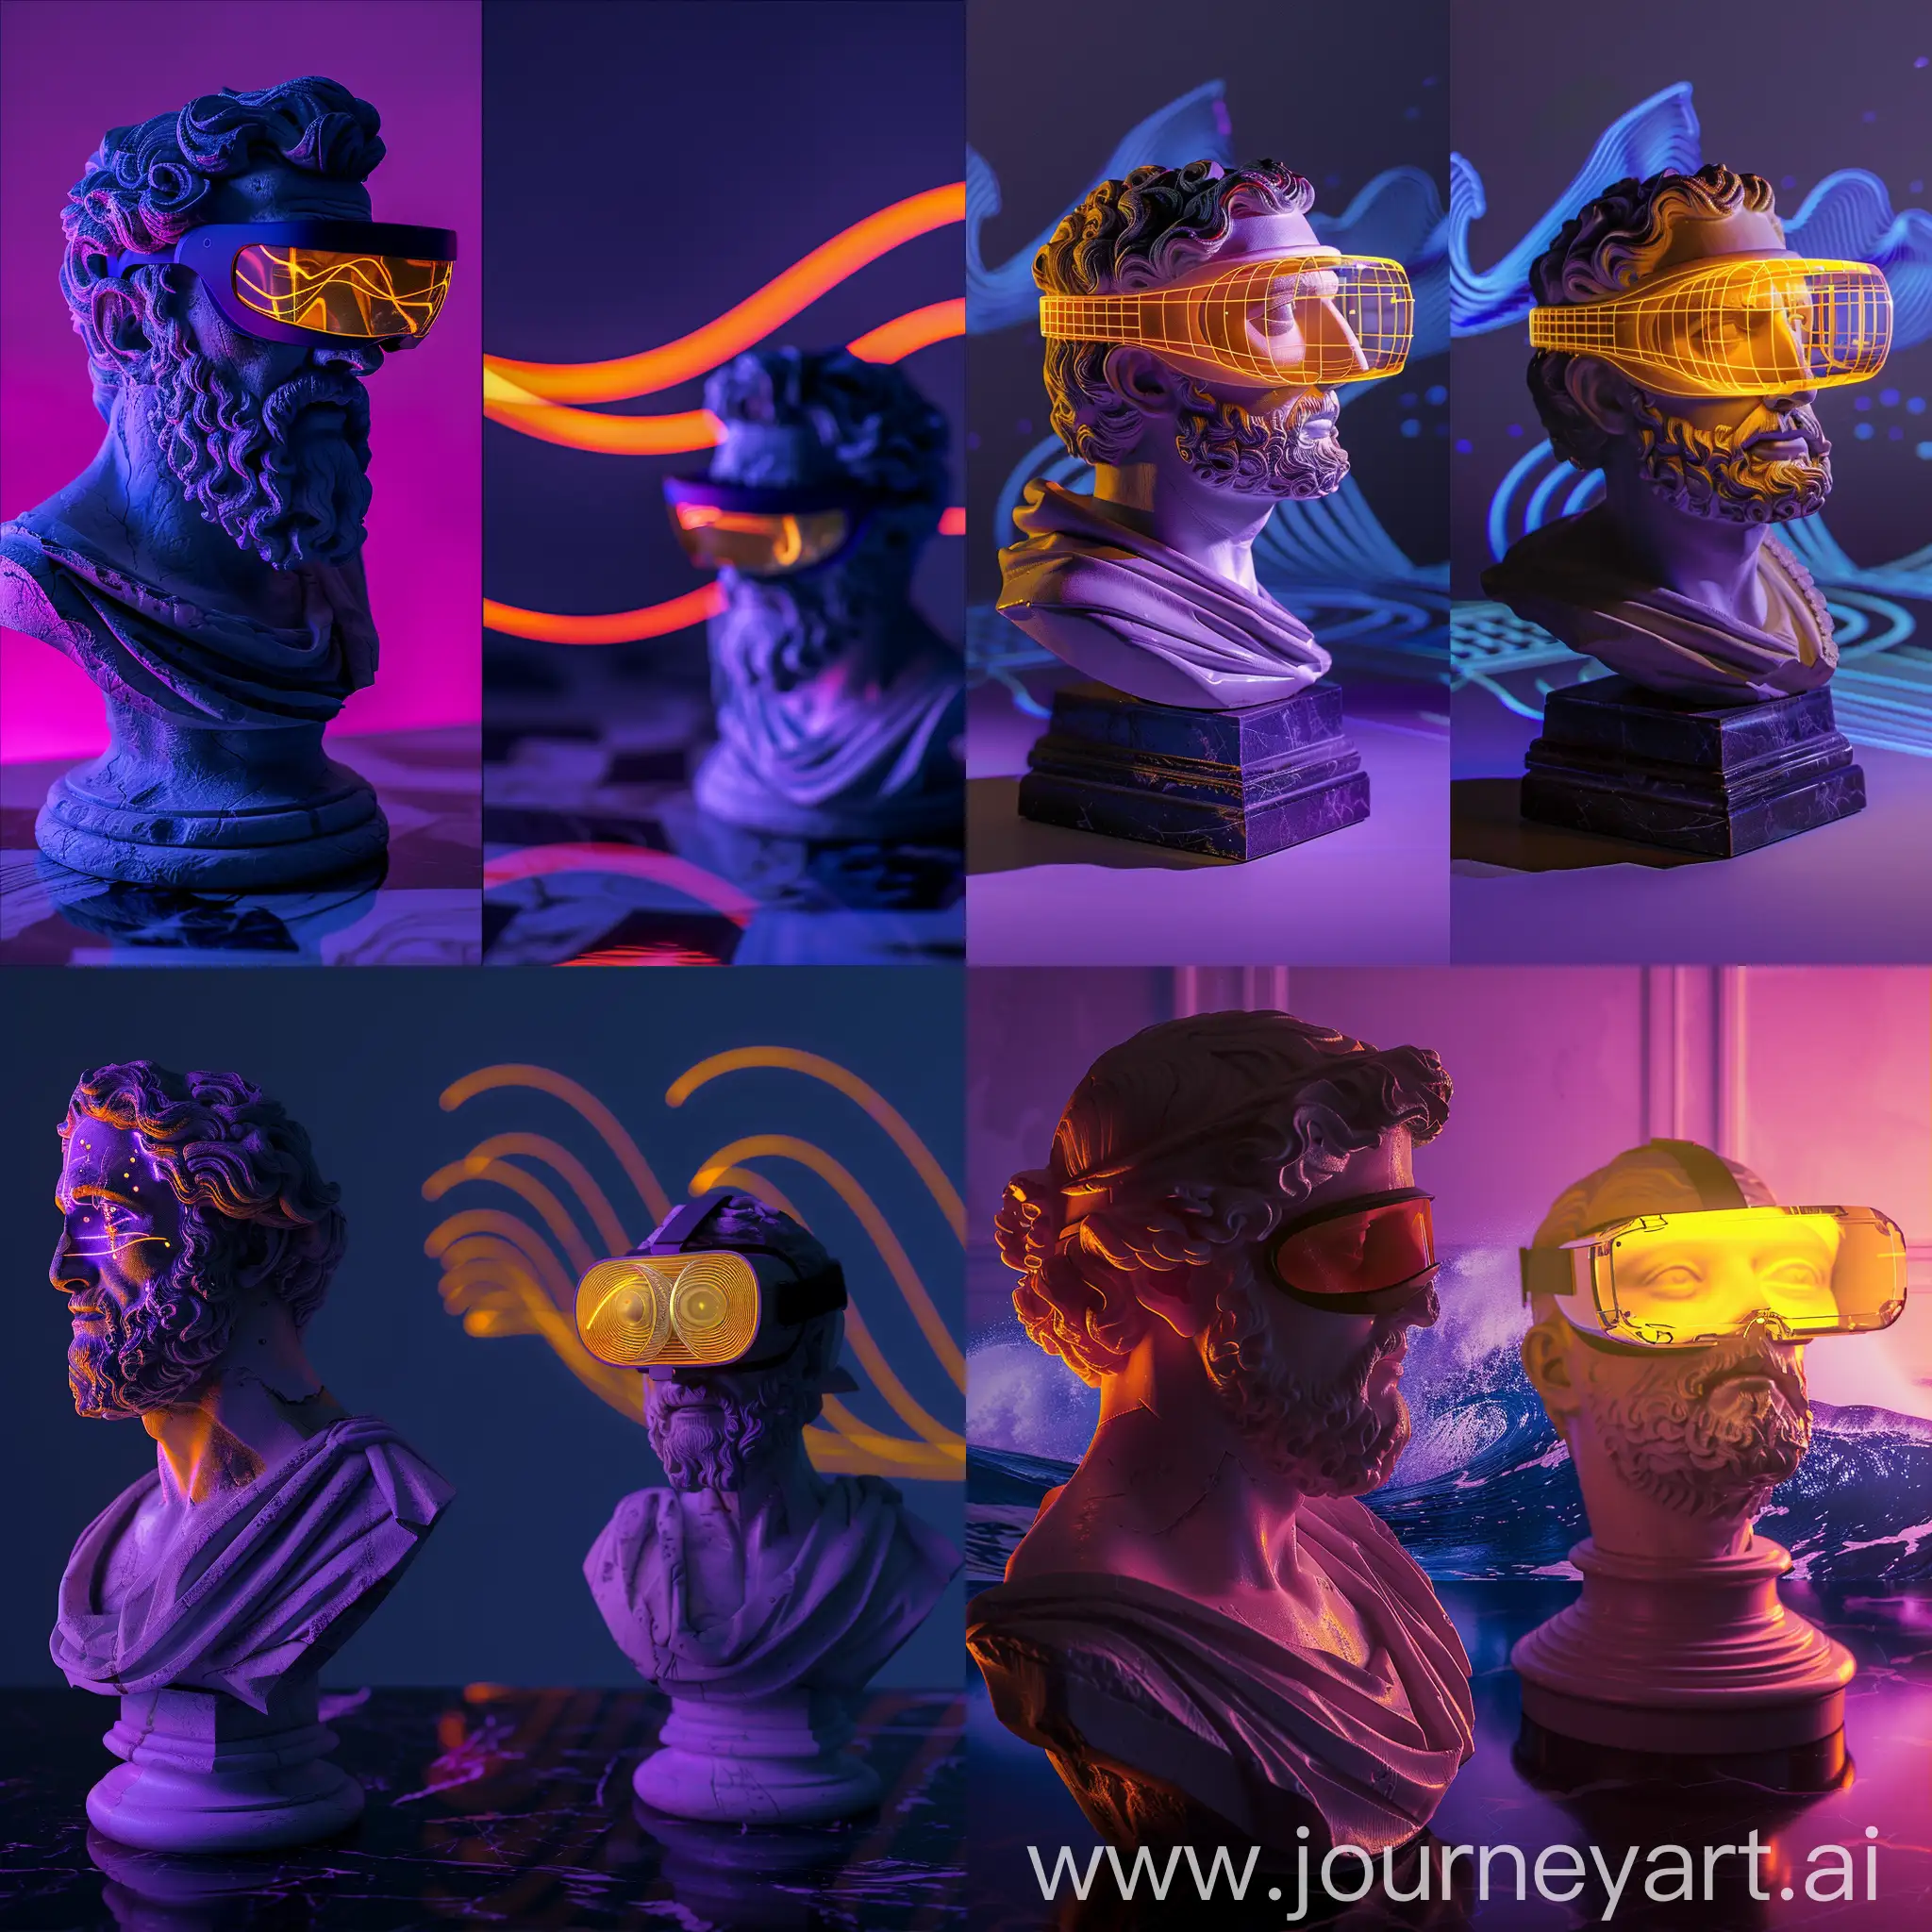 A Sculpture of Greek Philosopher in the left, Bust Style, Headshot Pose, Dramatic Shot, Dark theme, Purple light, a VR glass on his eyes with high yellow light, wave pattern in background, long shot, High Precision ar-- 16:9